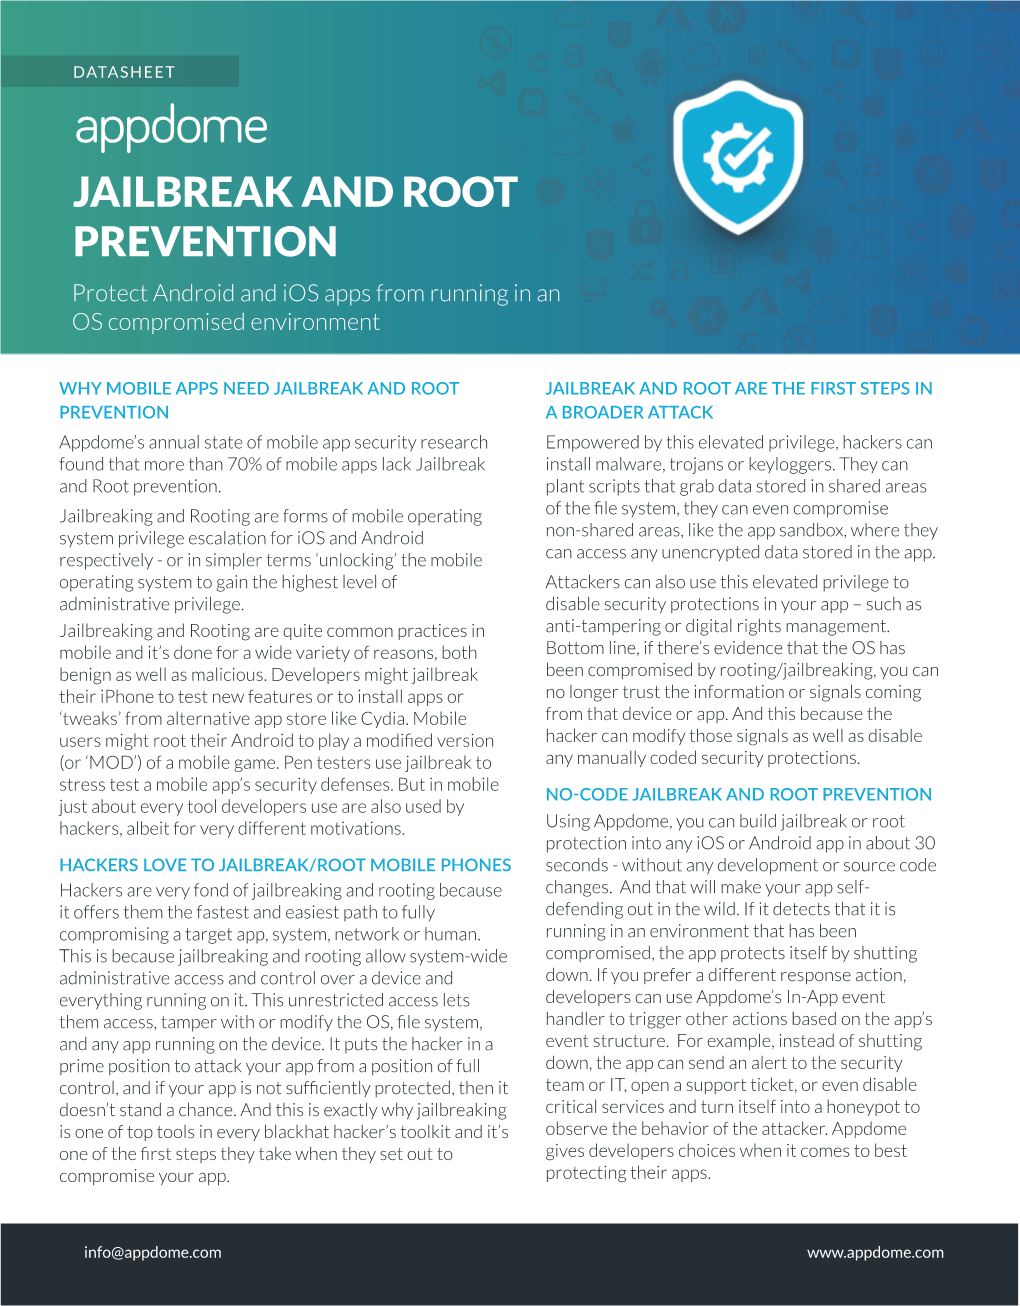 JAILBREAK and ROOT PREVENTION Protect Android and Ios Apps from Running in an OS Compromised Environment